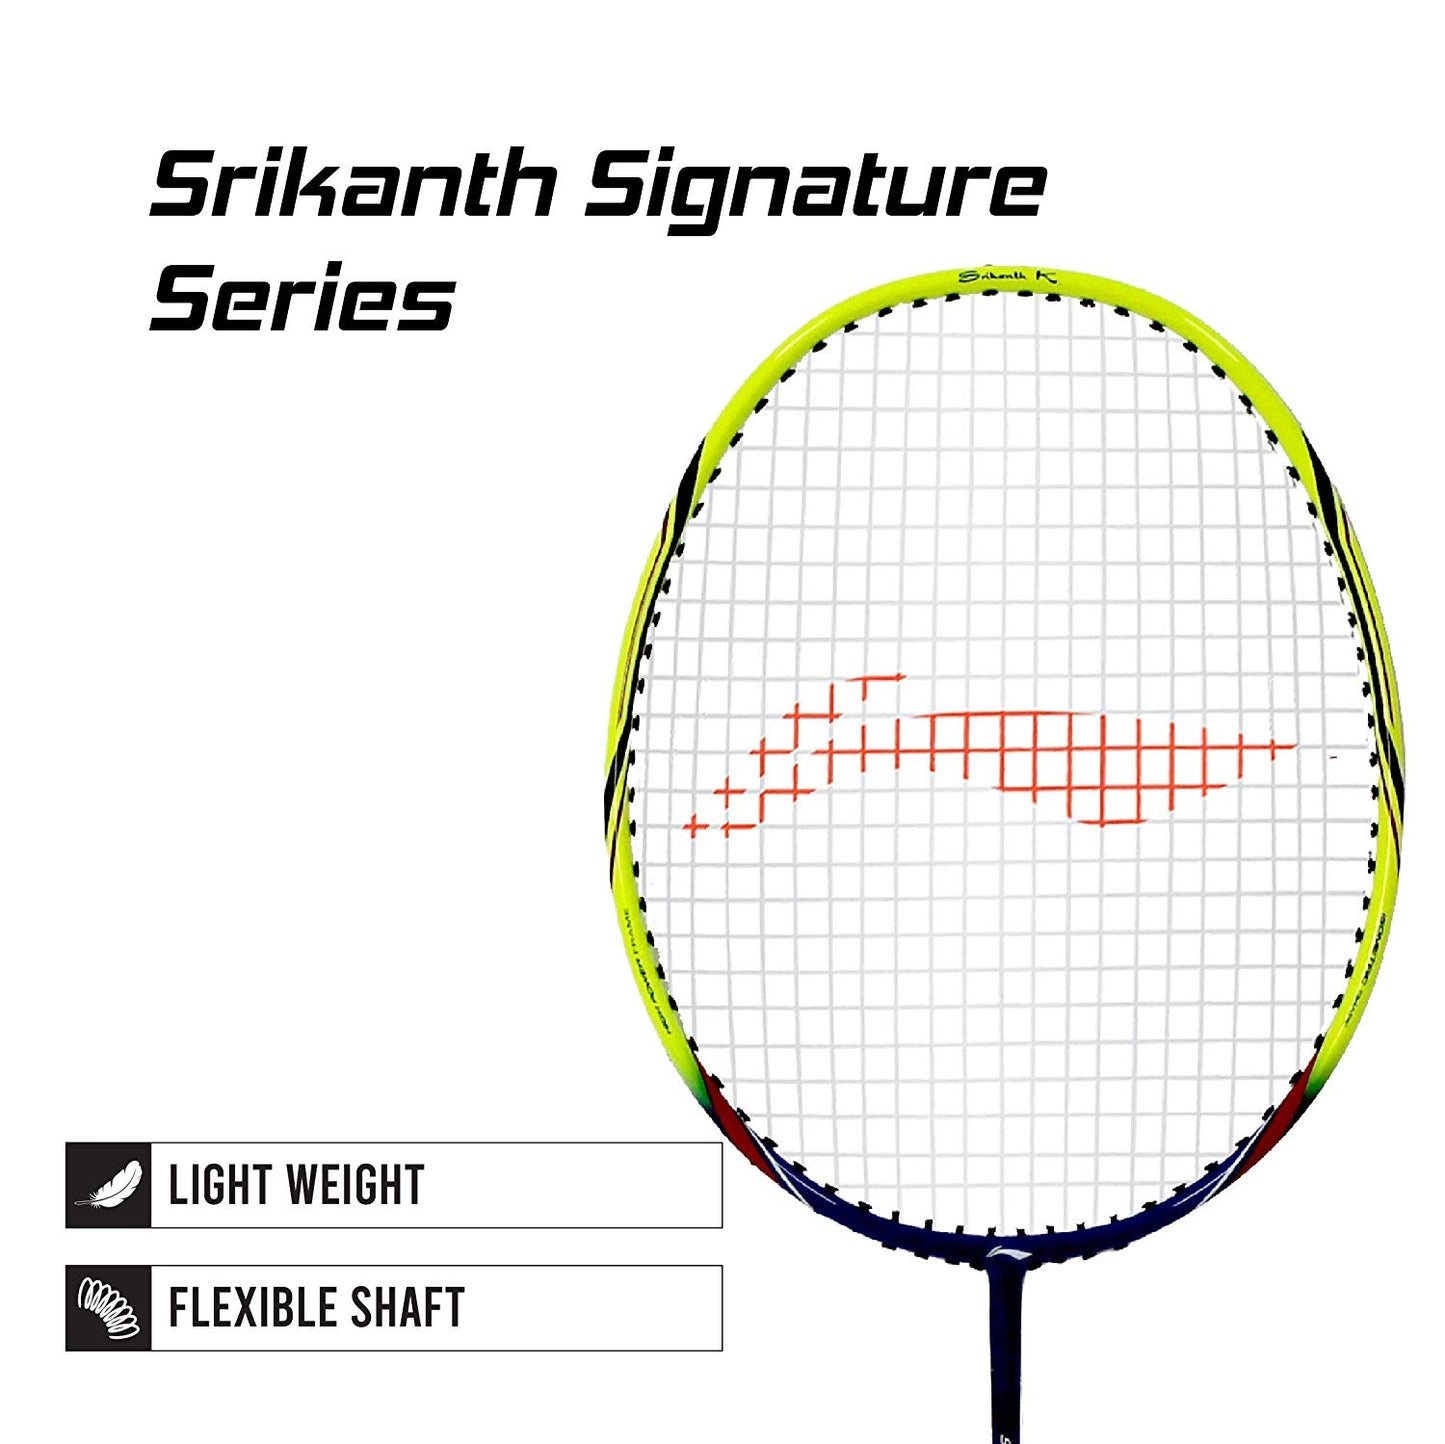 Li-Ning SK Junior 77 (Strung) Badminton Racquets with Free Head Cover Blend - Navy/Lime - Best Price online Prokicksports.com